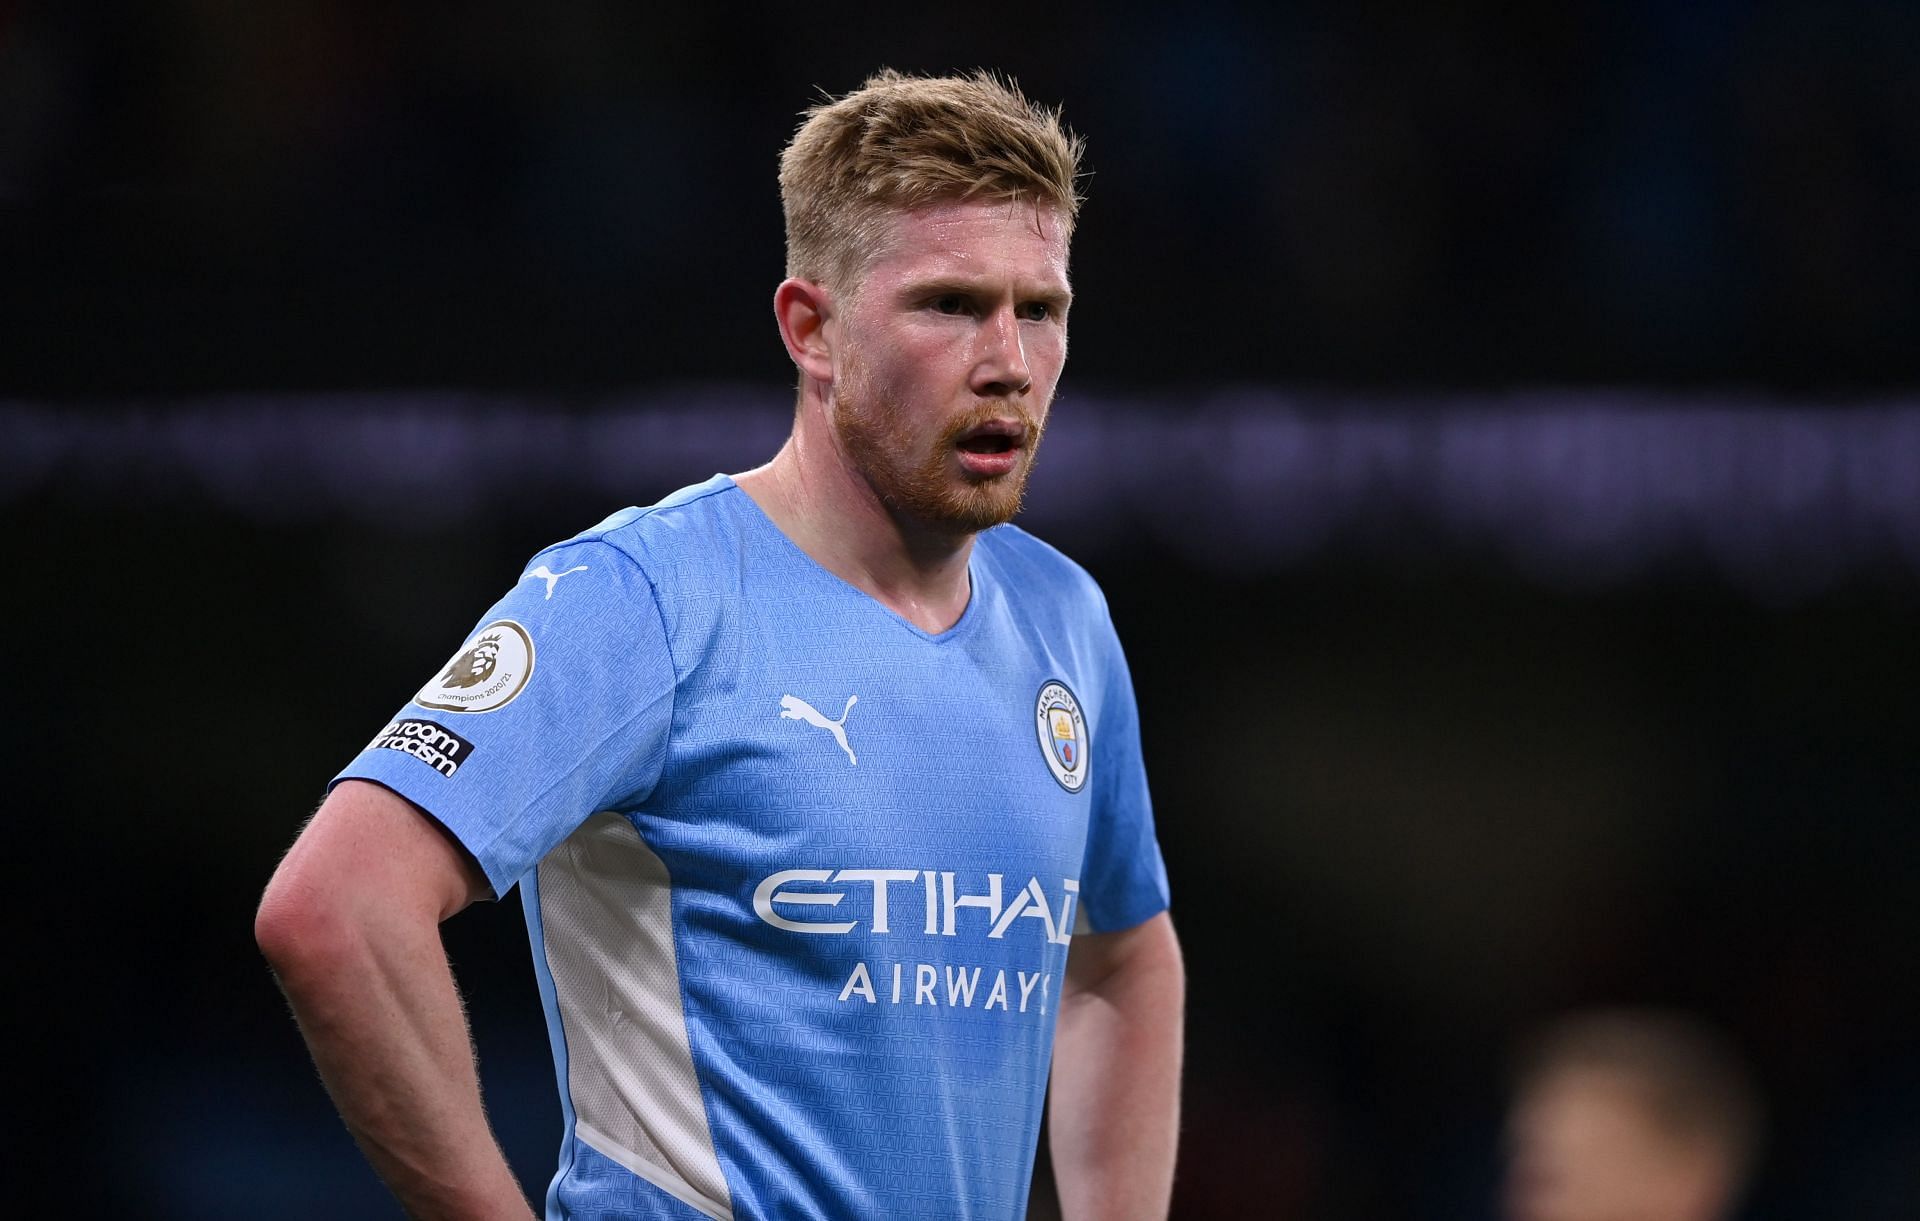 Kevin De Bruyne has had a successful career at City.